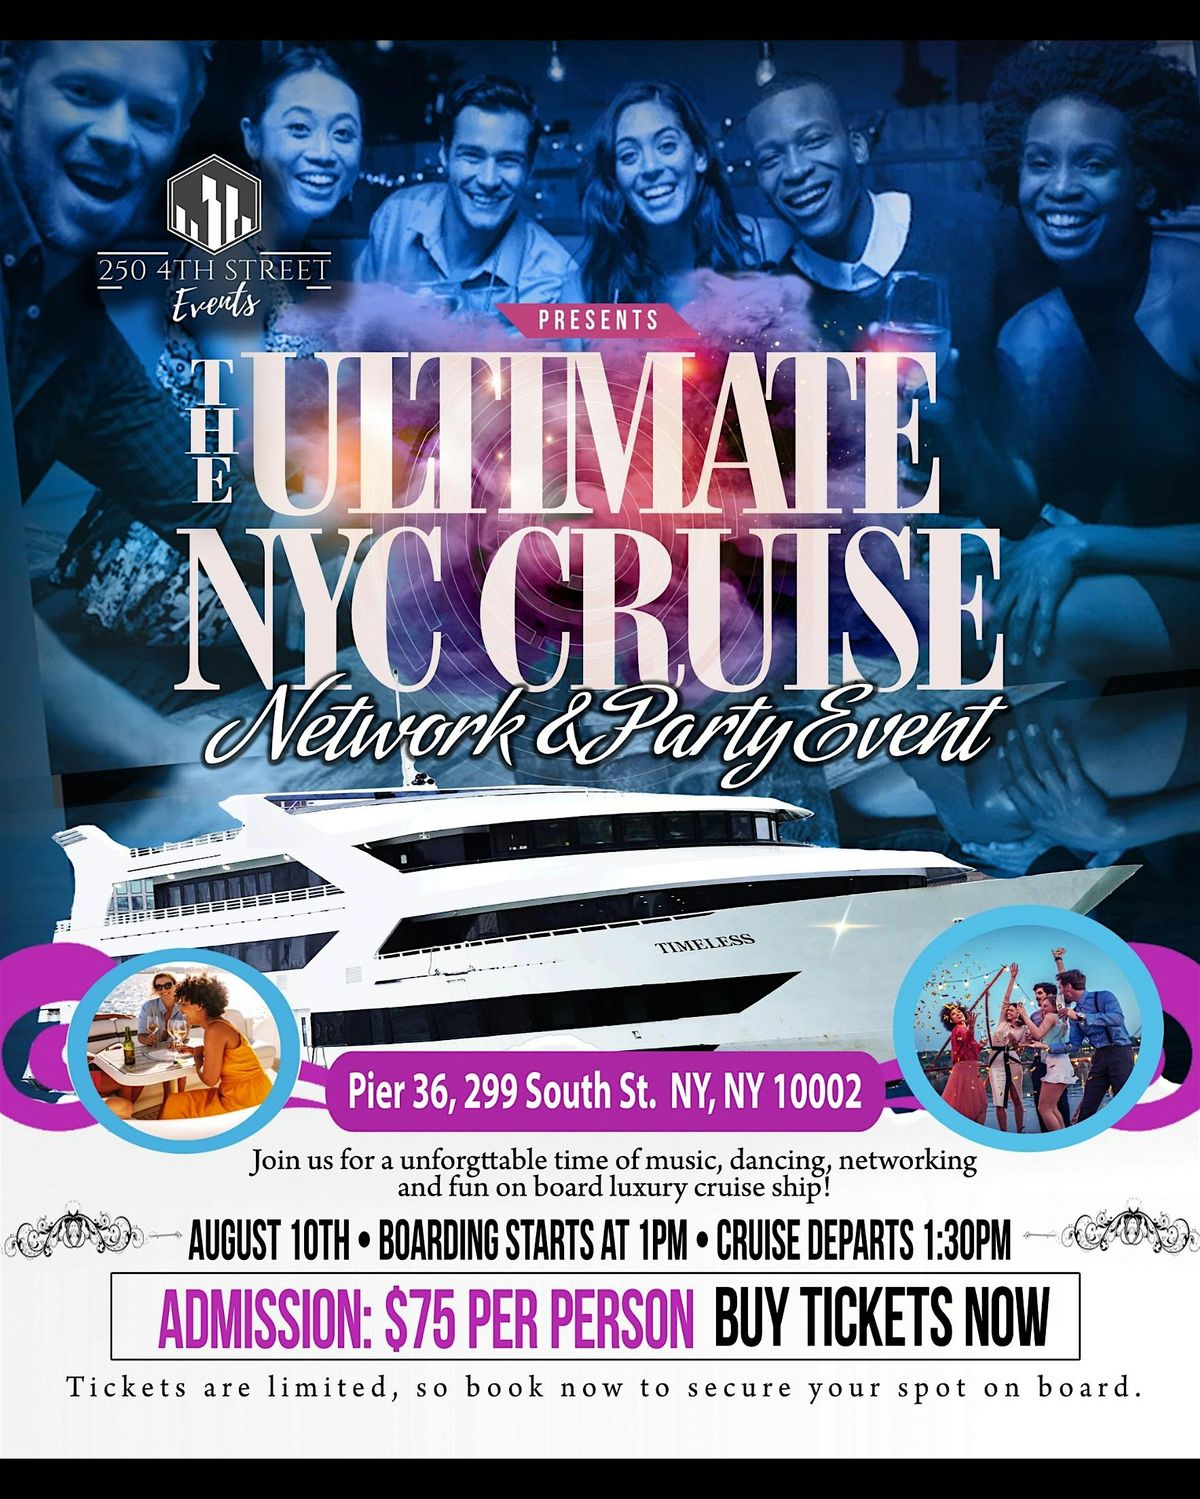 NYC's Ultimate Network & Party Cruise